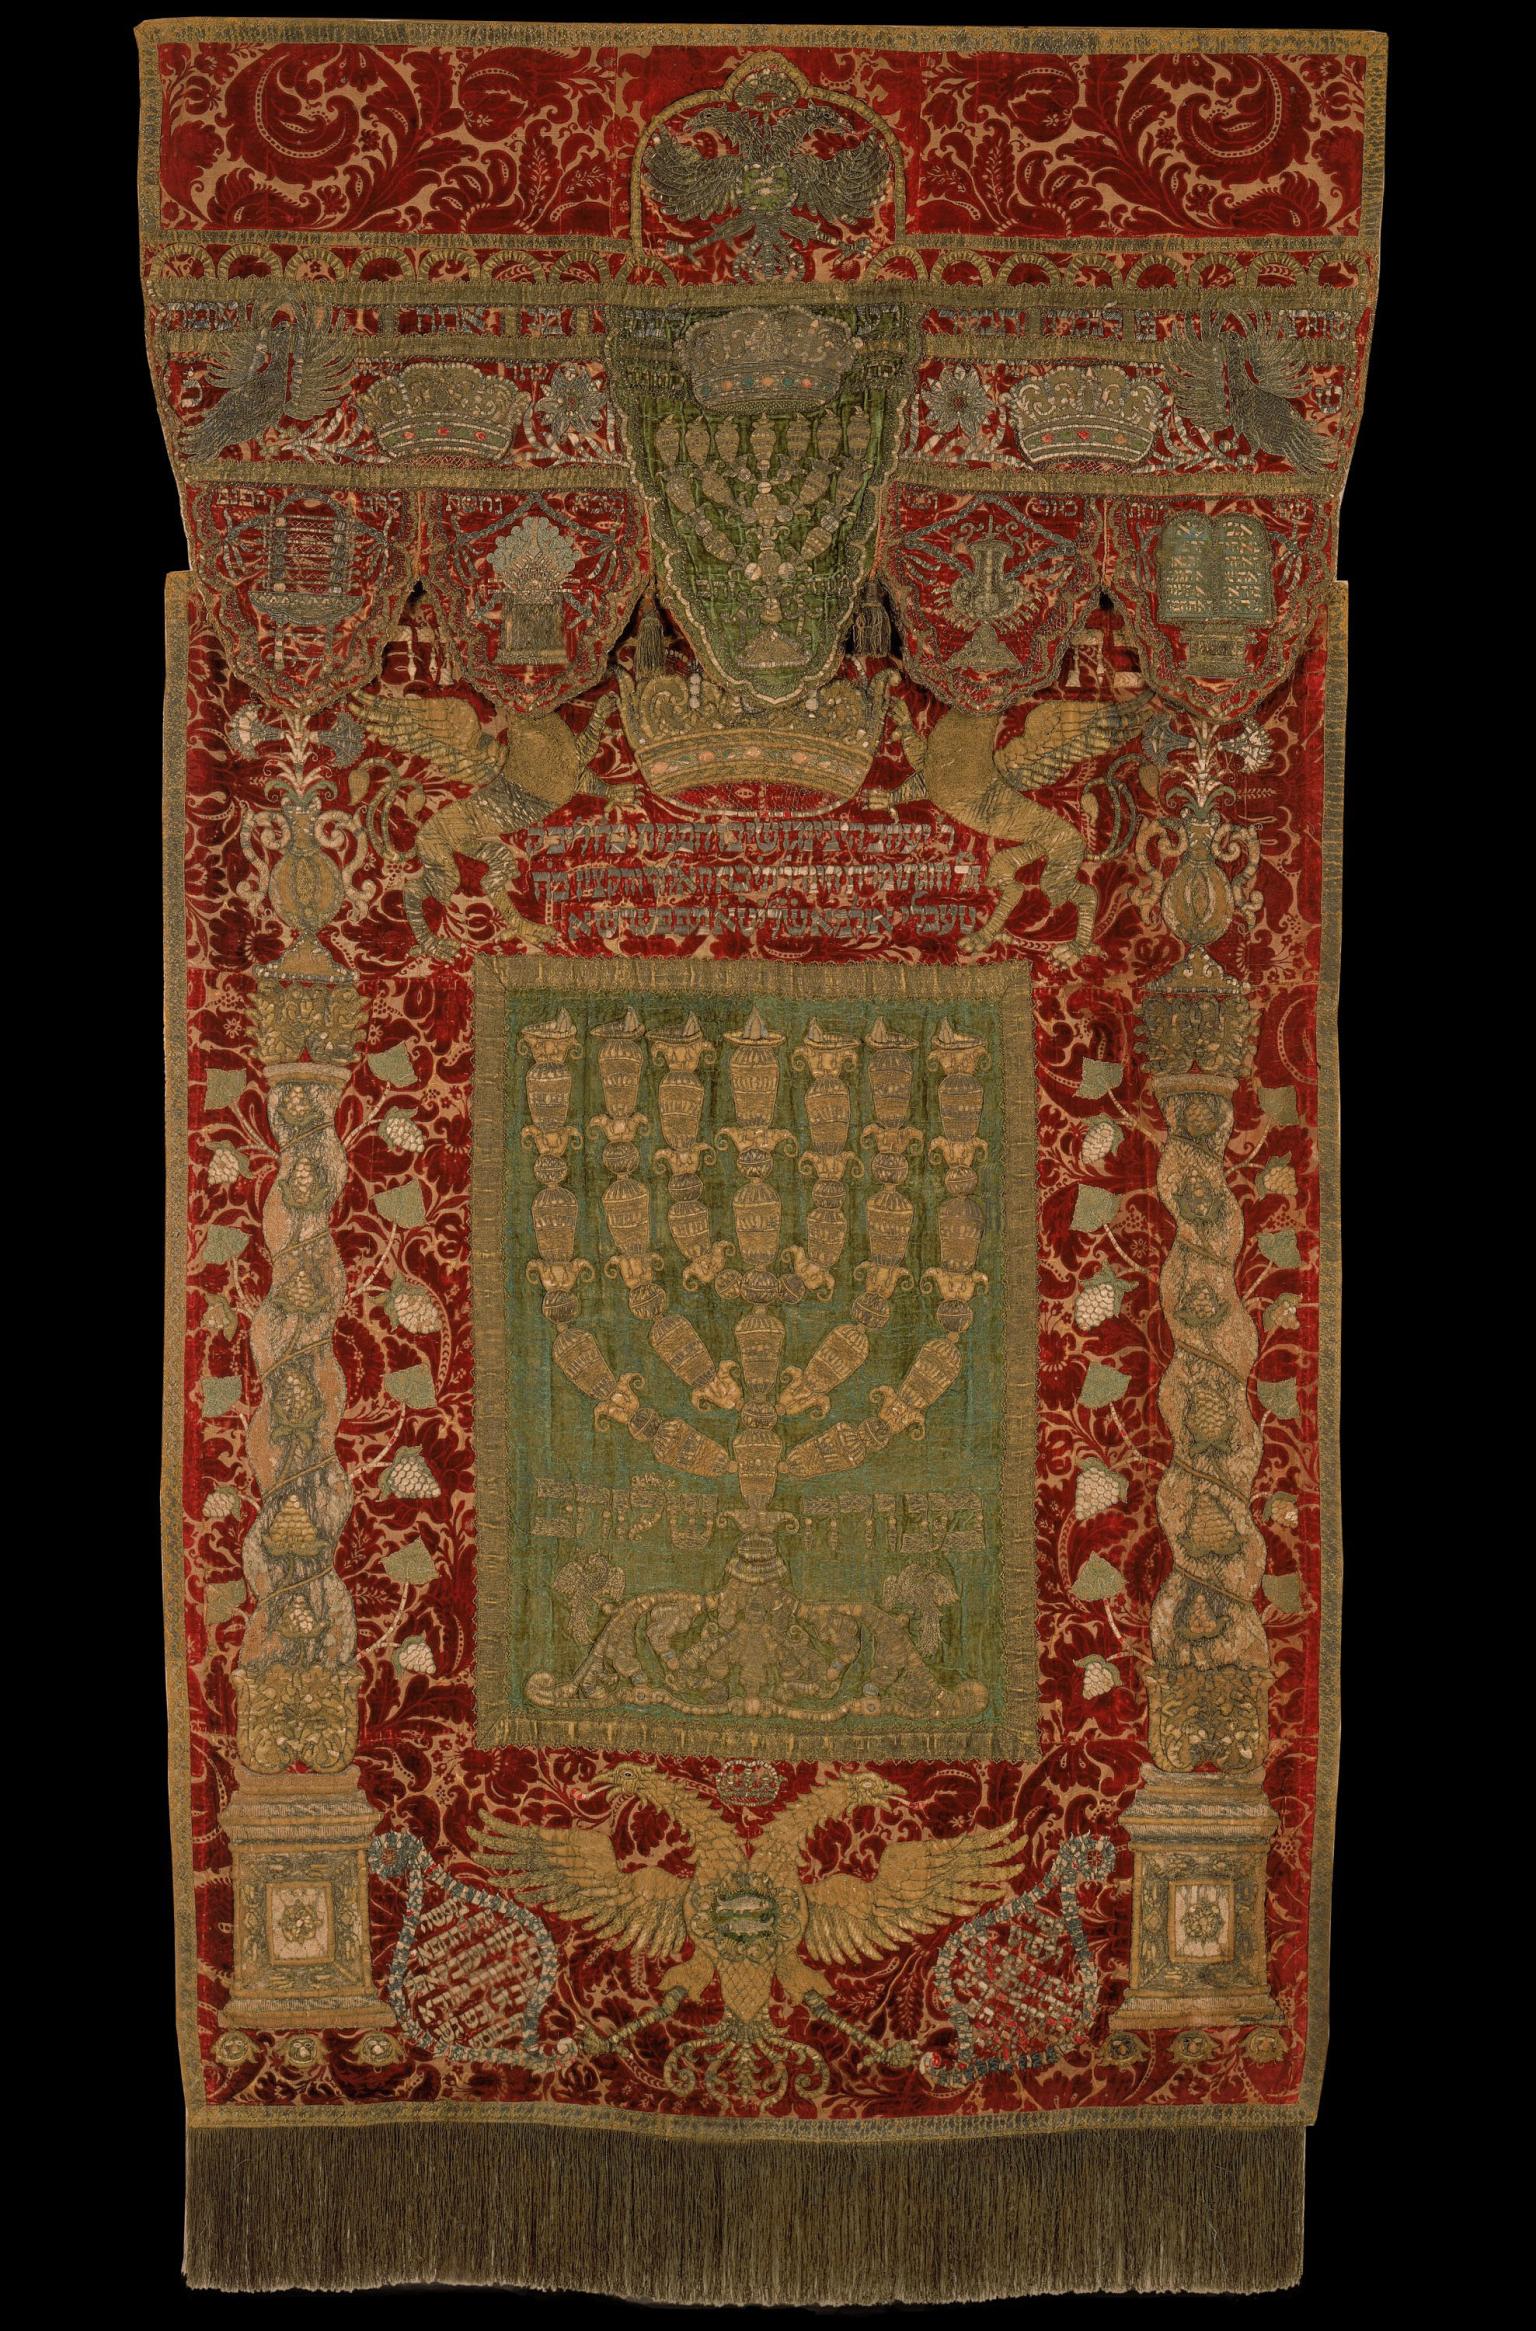 Embroidered curtain and valence bearing three crowns and five vessels.